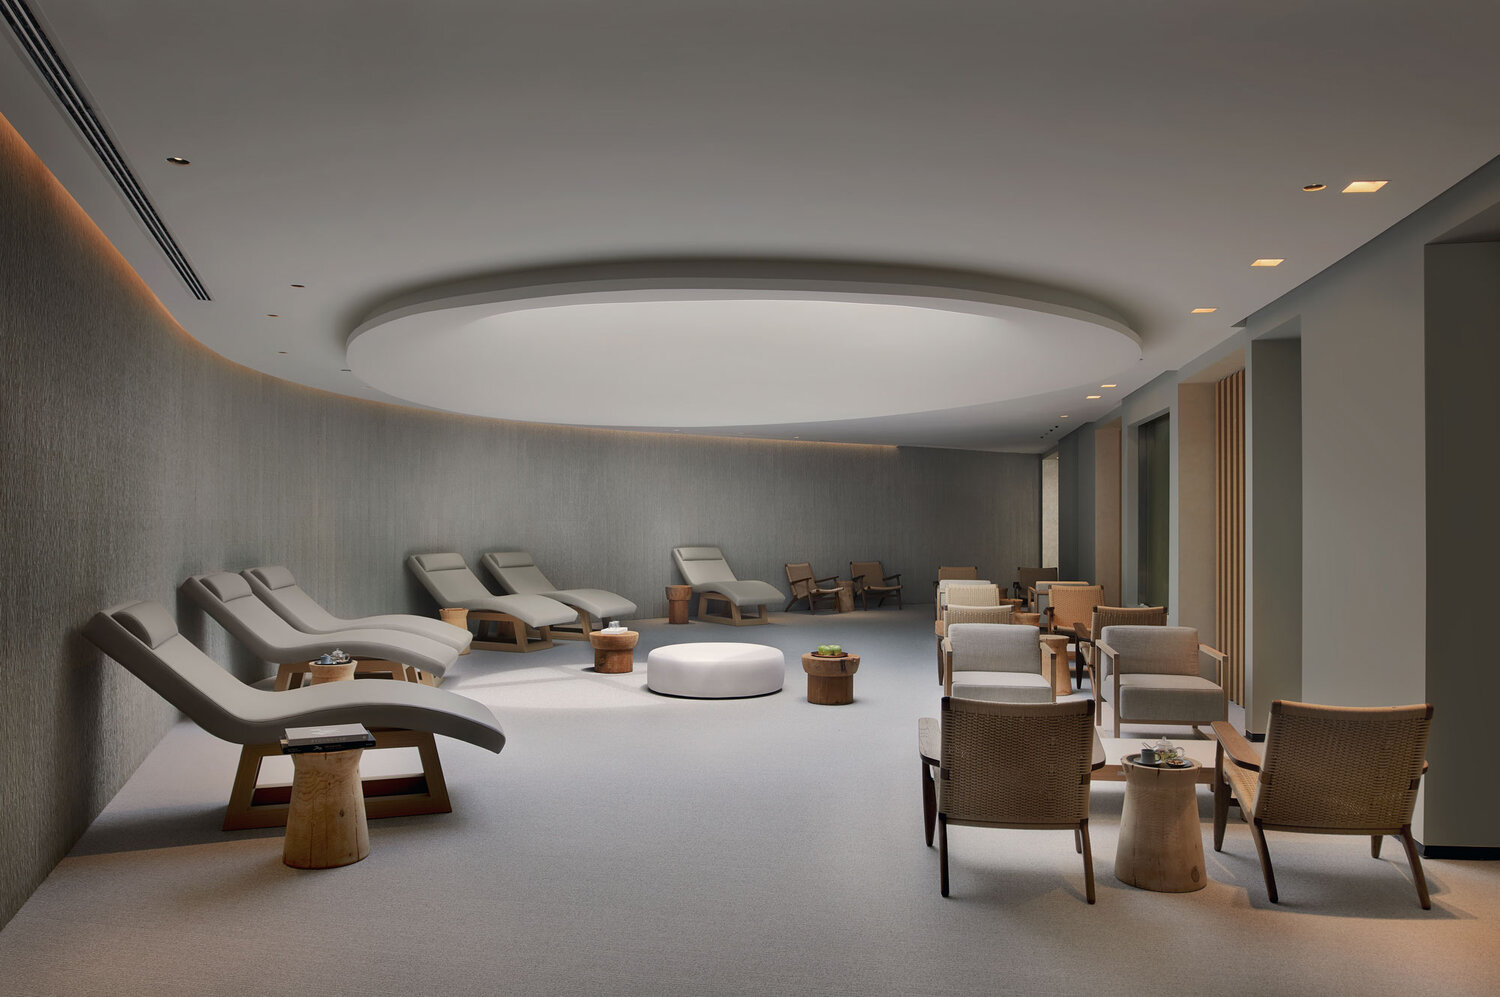 Monotone modern room with row of lounge chairs along a curved wall and small seating areas to the right.